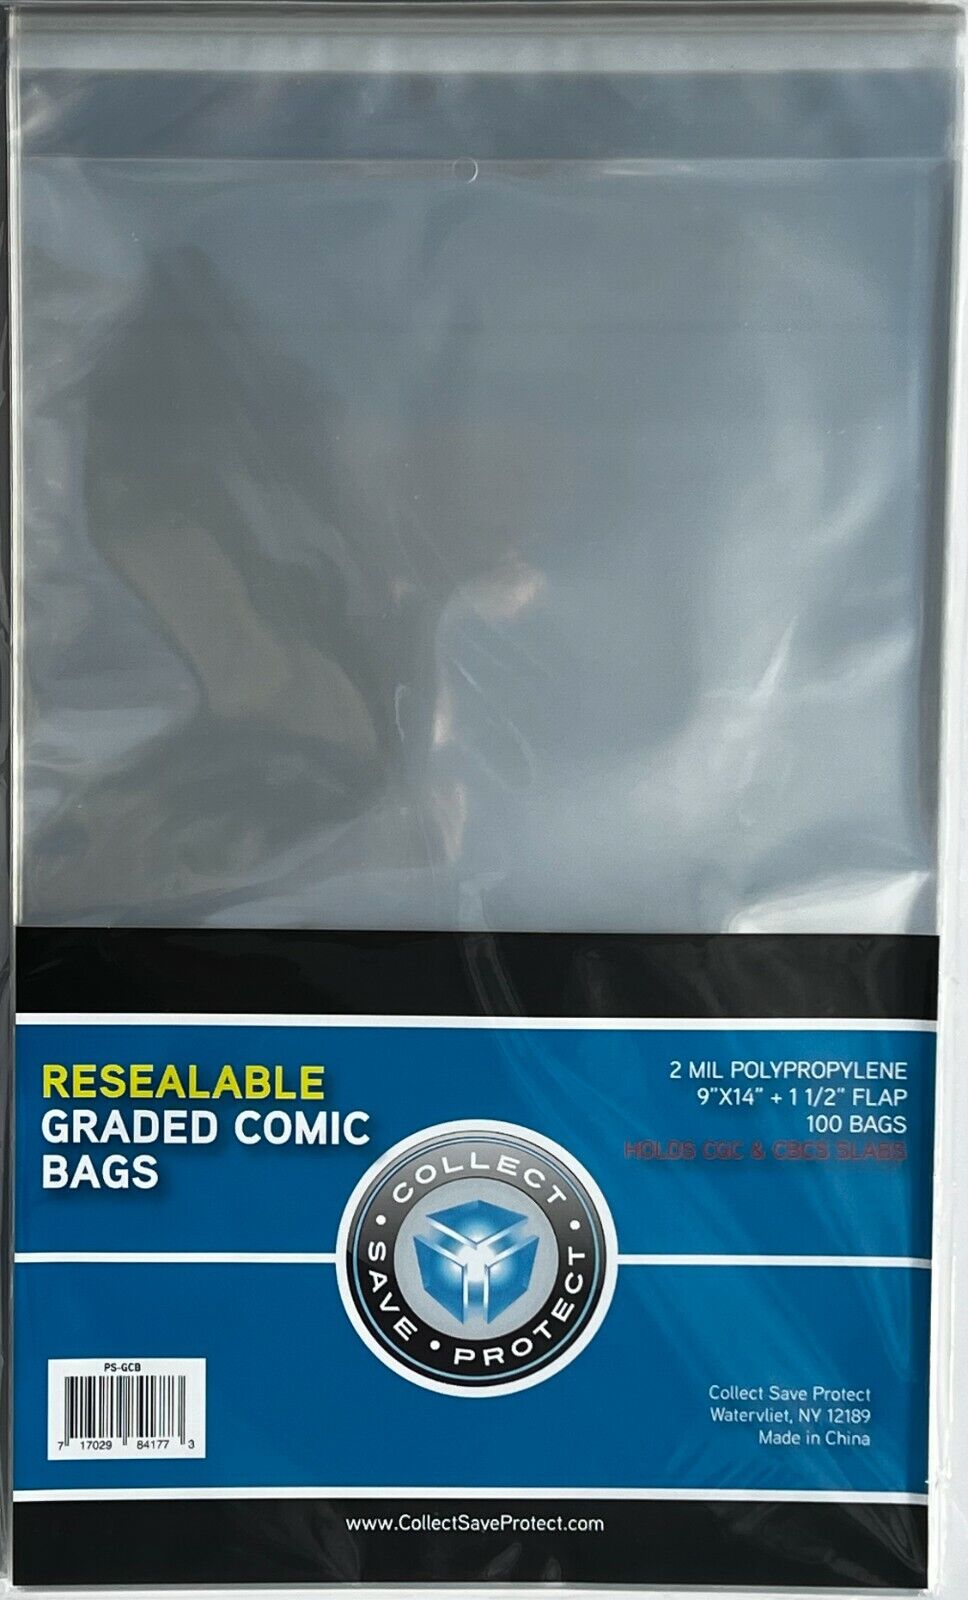 100 New CSP Graded Comic Book Resealable Bags 9x14 Acid Free Bags For CGC CBCS